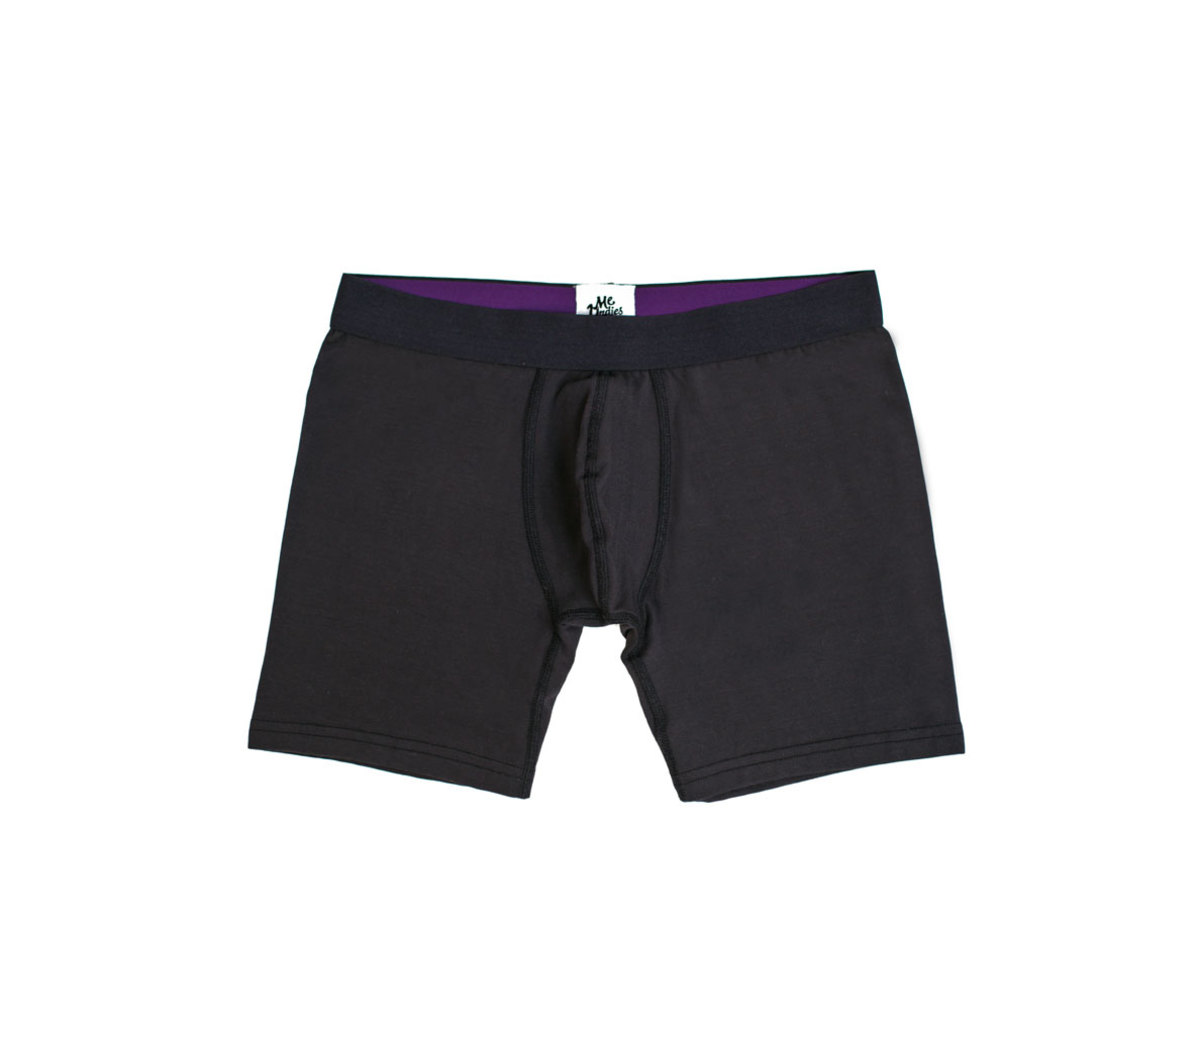 14 Boxer Briefs She Wants to See You In - Men's Journal